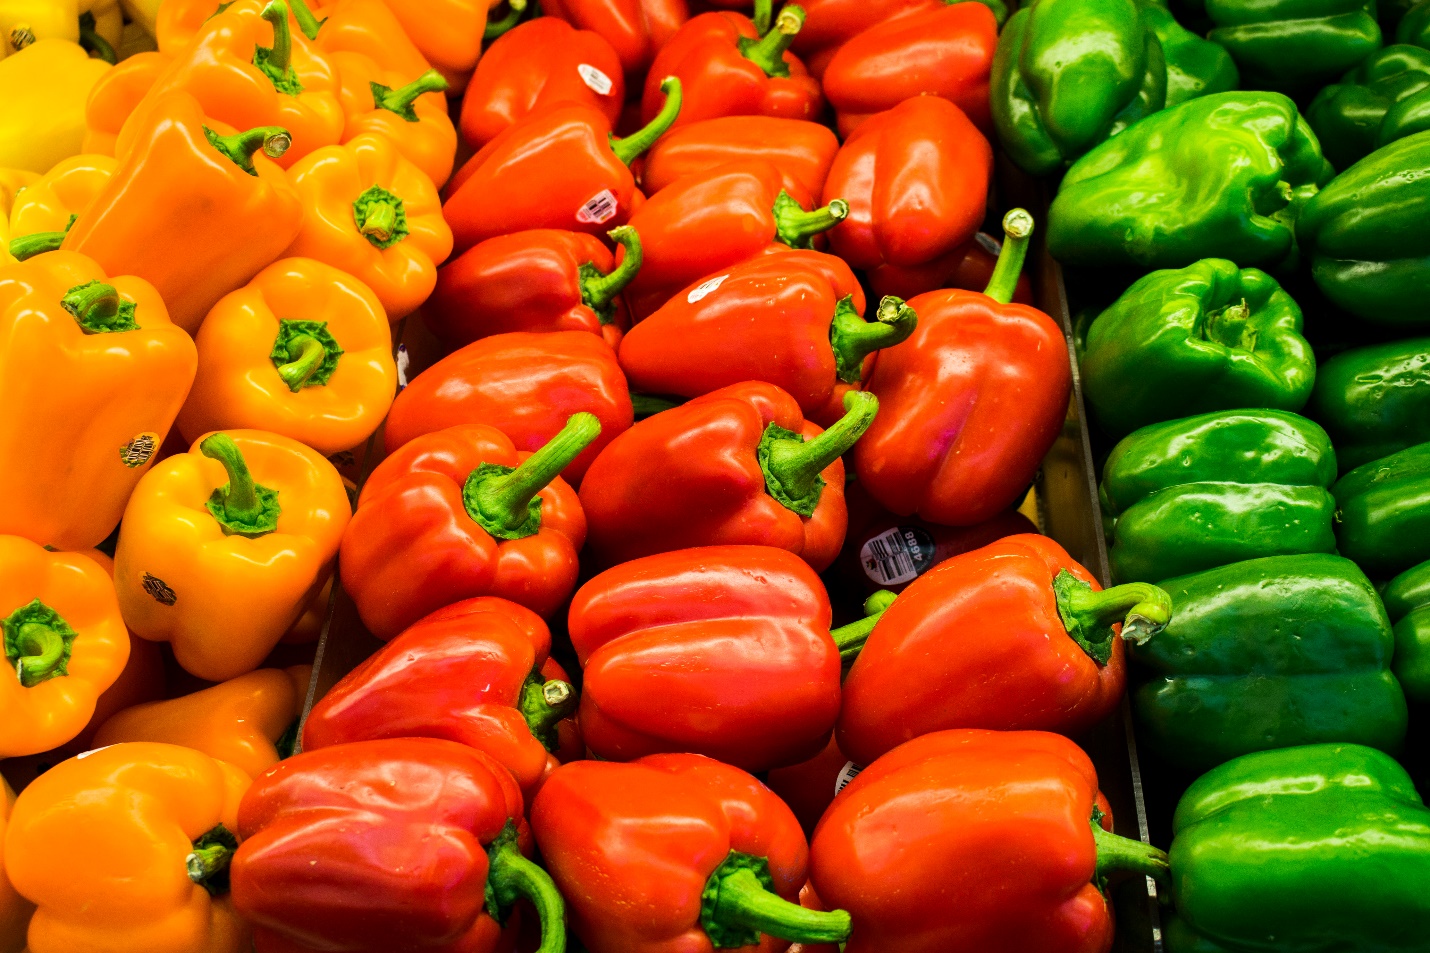 A pile of colorful peppers

Description automatically generated